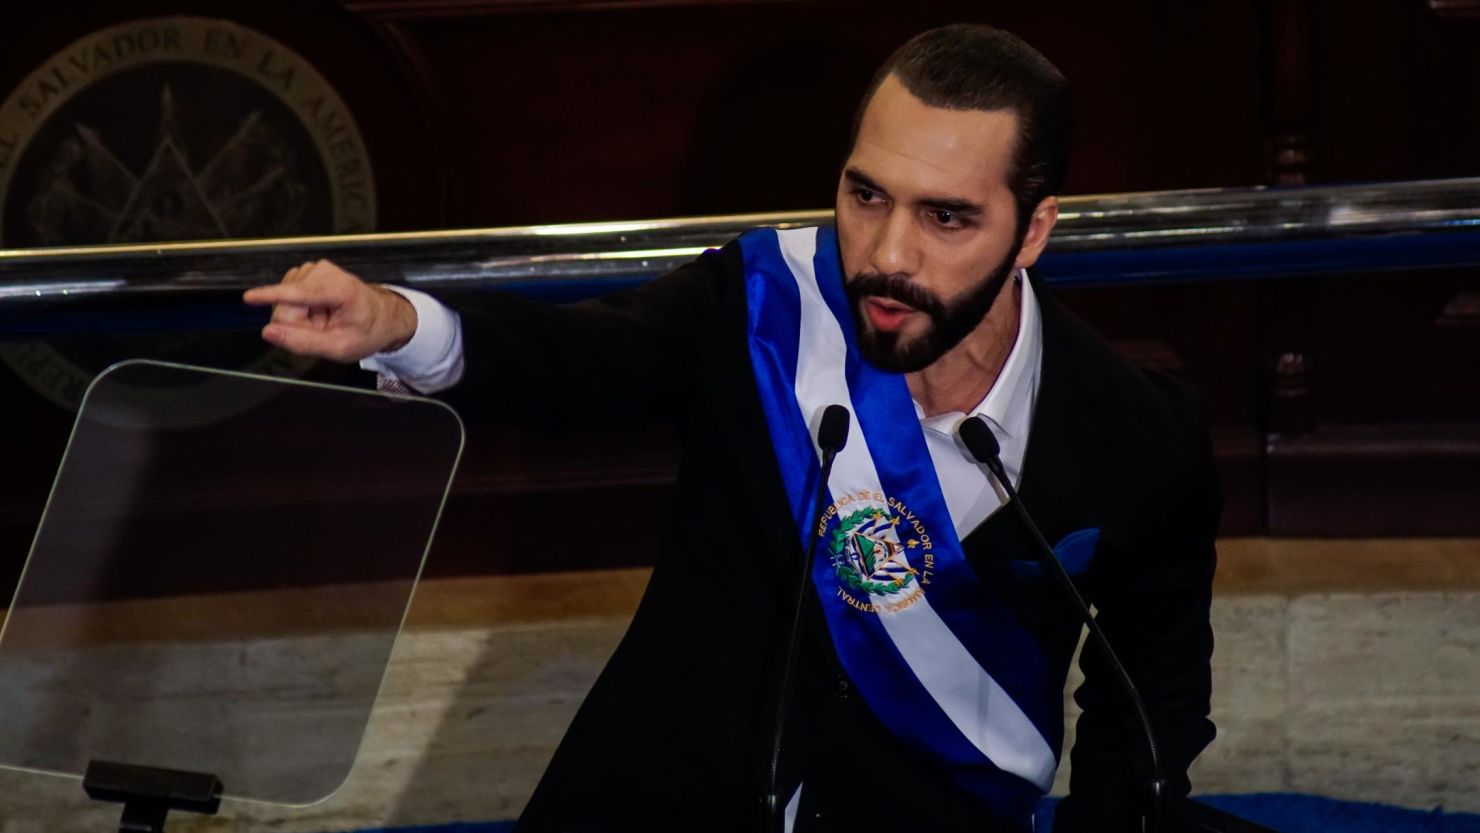 SAN SALVADOR, EL SALVADOR - JUNE 1: Salvadoran President Nayib Bukele speaks during a report to the nation for the 4th year of the current presidential administration in the plenary session at the Legislative Assembly on June 1, 2023 in San Salvador, El Salvador. President of El Salvador Nayib Bukele marks his fourth year of government on June 1 as he seeks re-election in the 2024 elections for a further 5-year period, despite accusations of being unconstitutional. (Photo by Alex Peña/Getty Images)